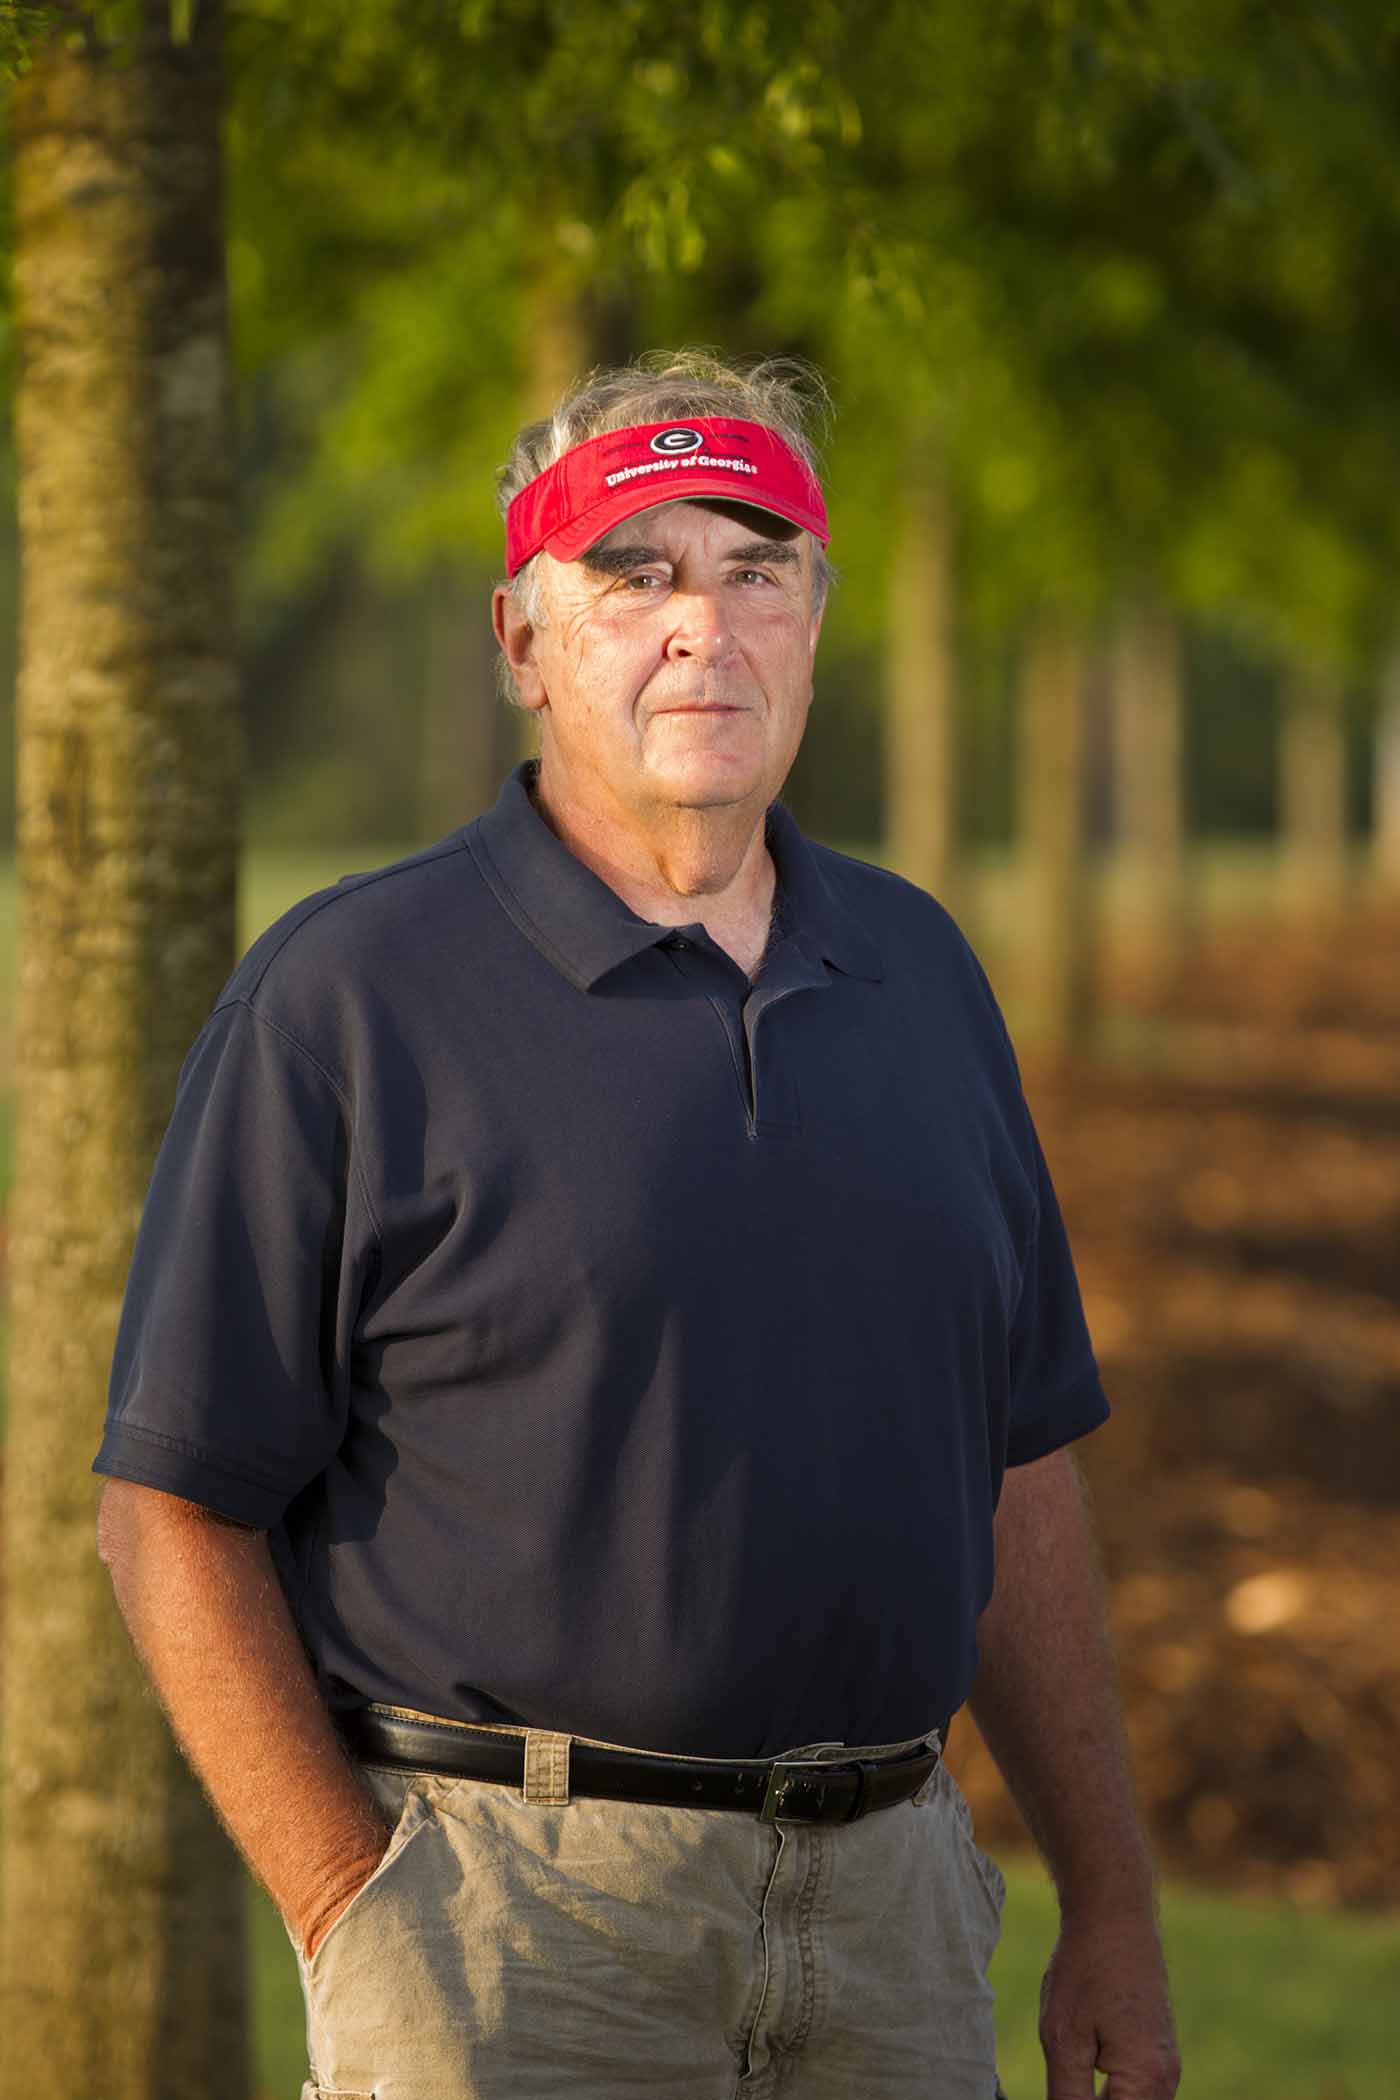 Michael Dirr, professor emeritus of horticulture at the University of Georgia College of Agricultural and Environmental Sciences, was recently inducted into the National Academy of Inventors.